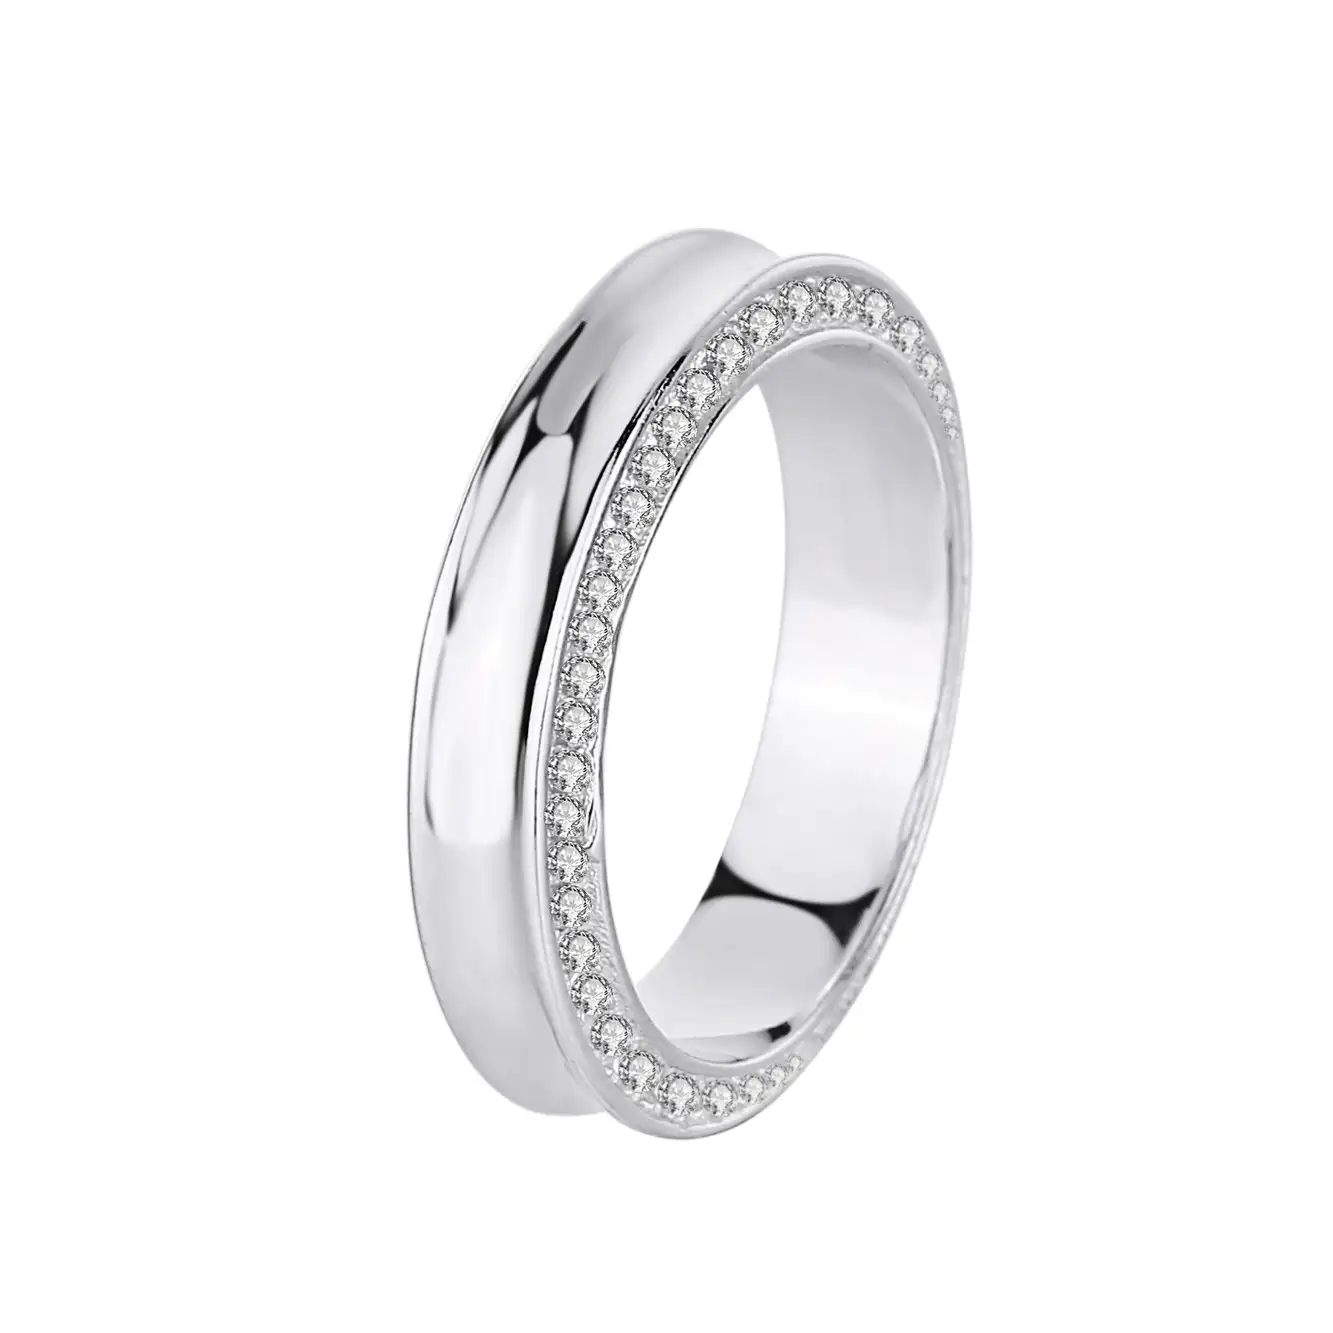 Silver Cubic Zirconia Band Ring 70100021